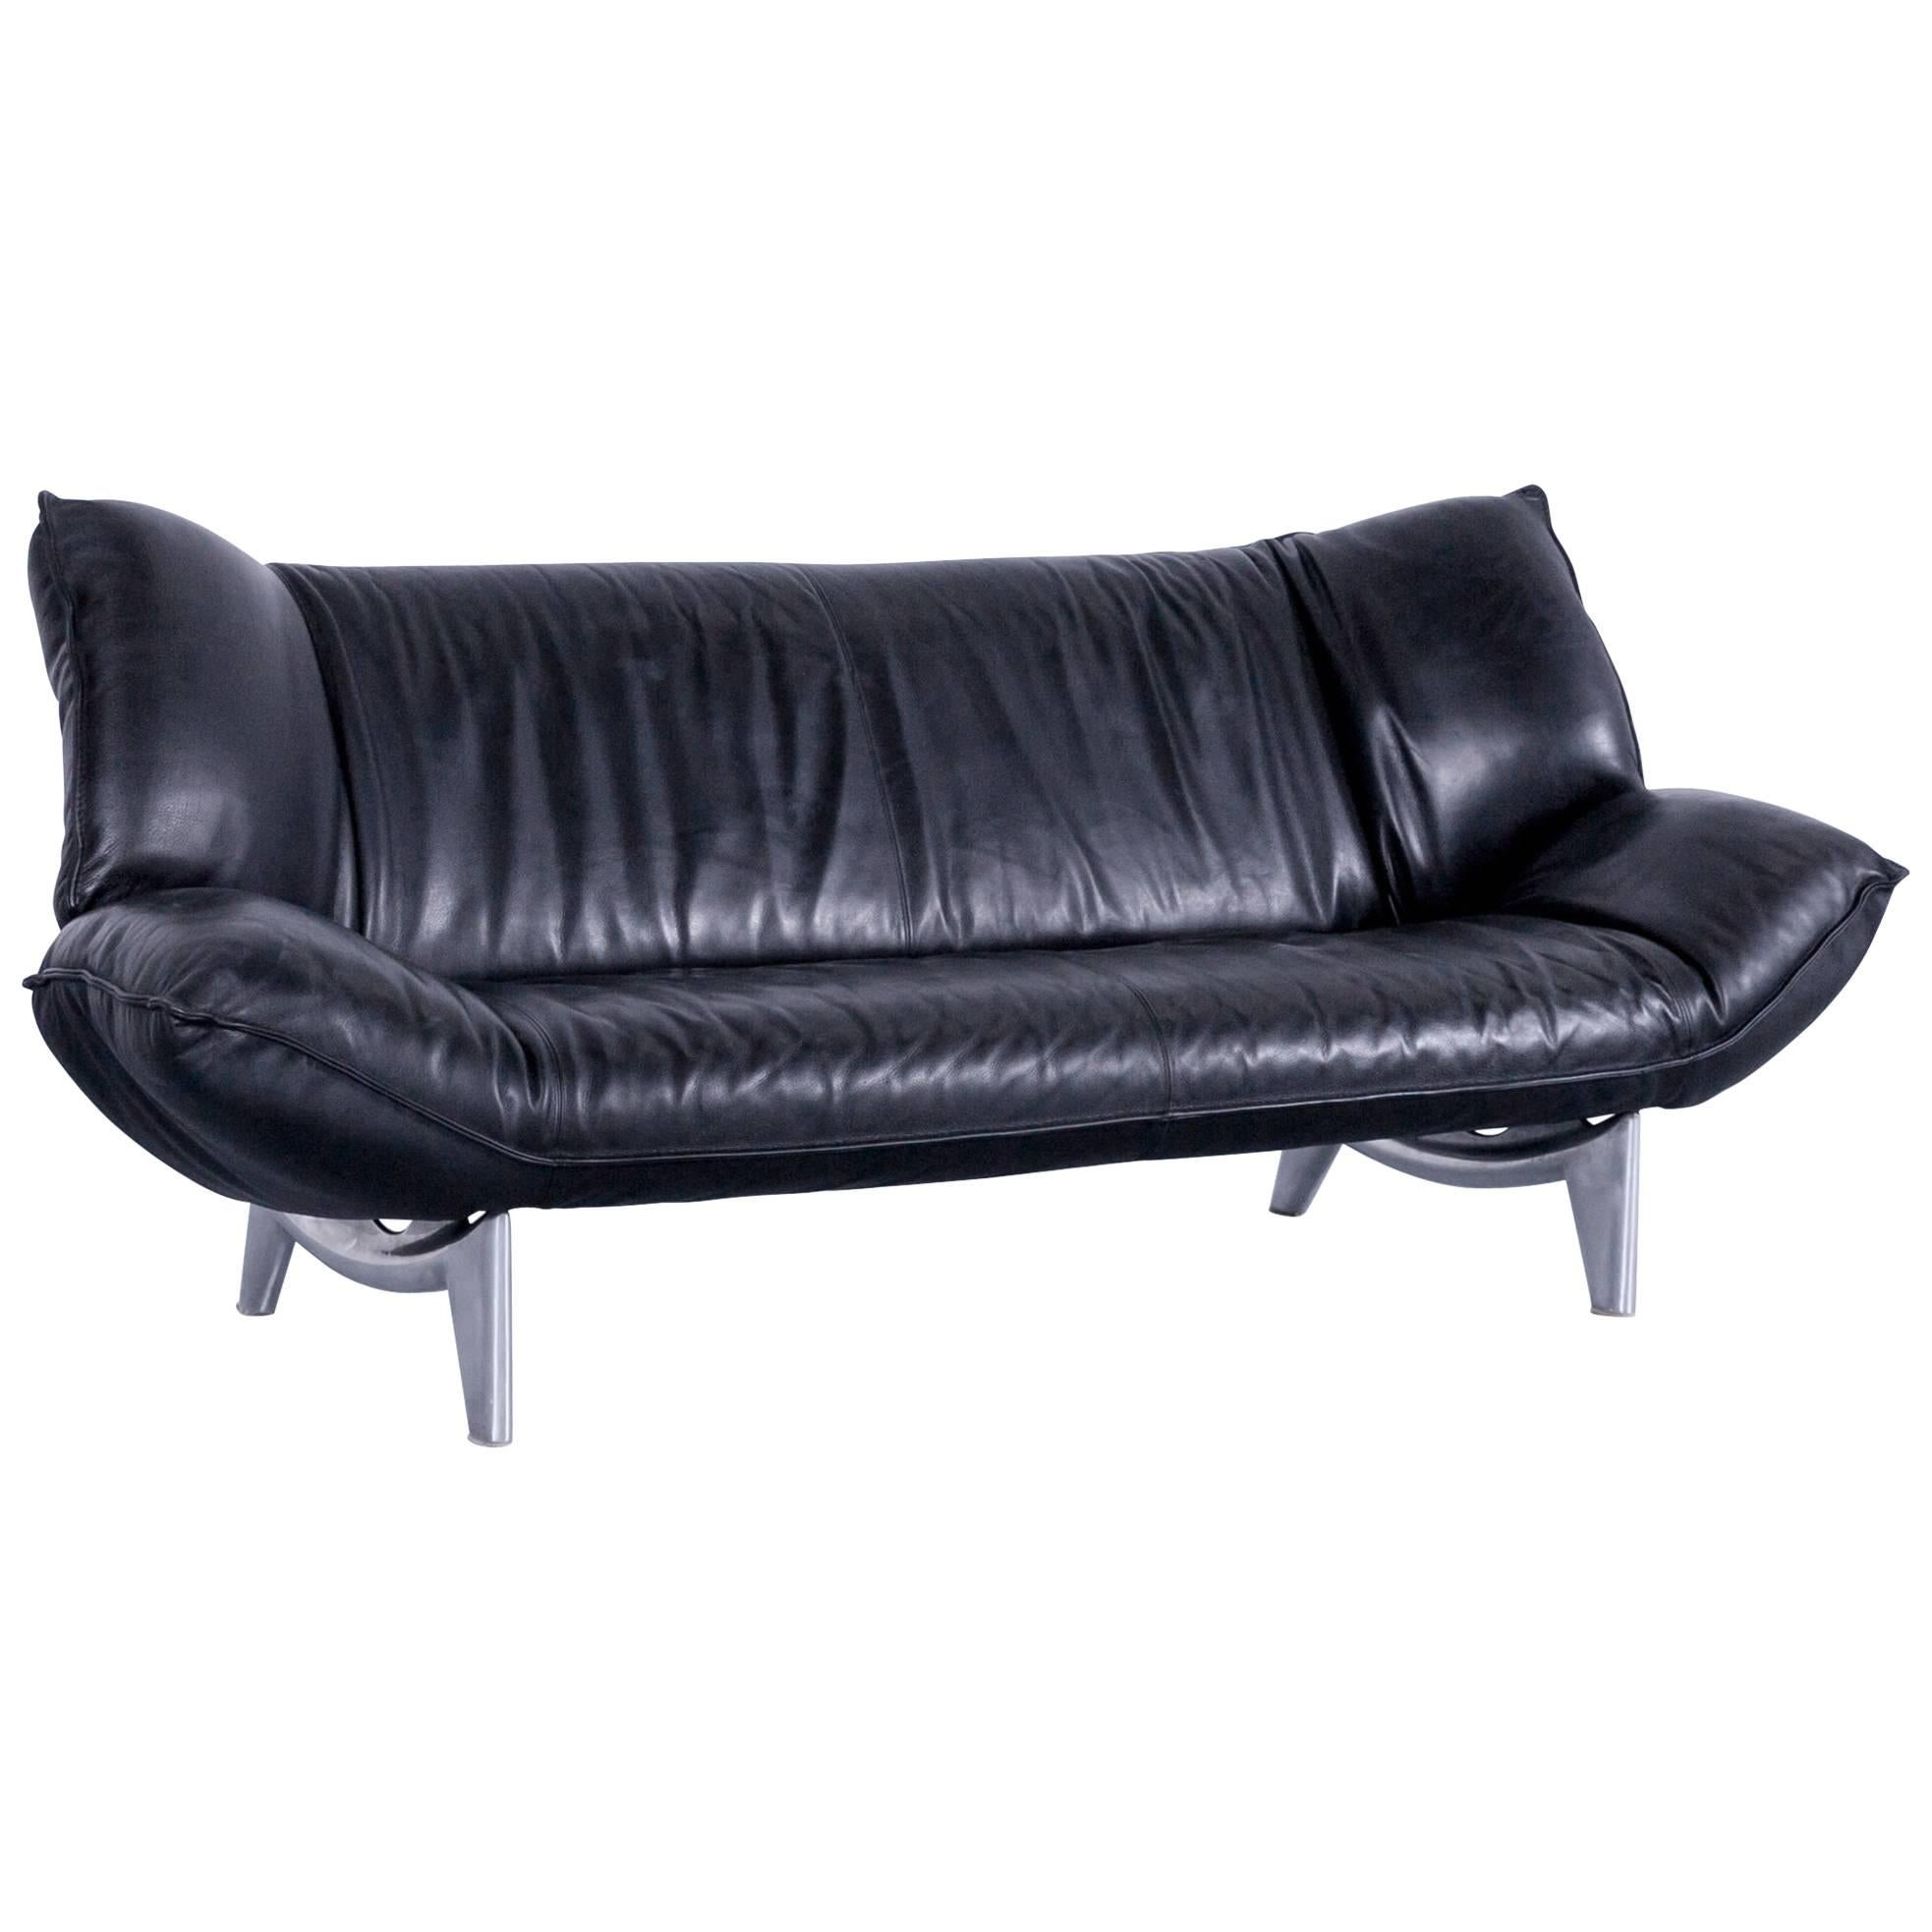 Leolux Tango Designer Leather Sofa Black Three-Seat Couch Function Metal For Sale